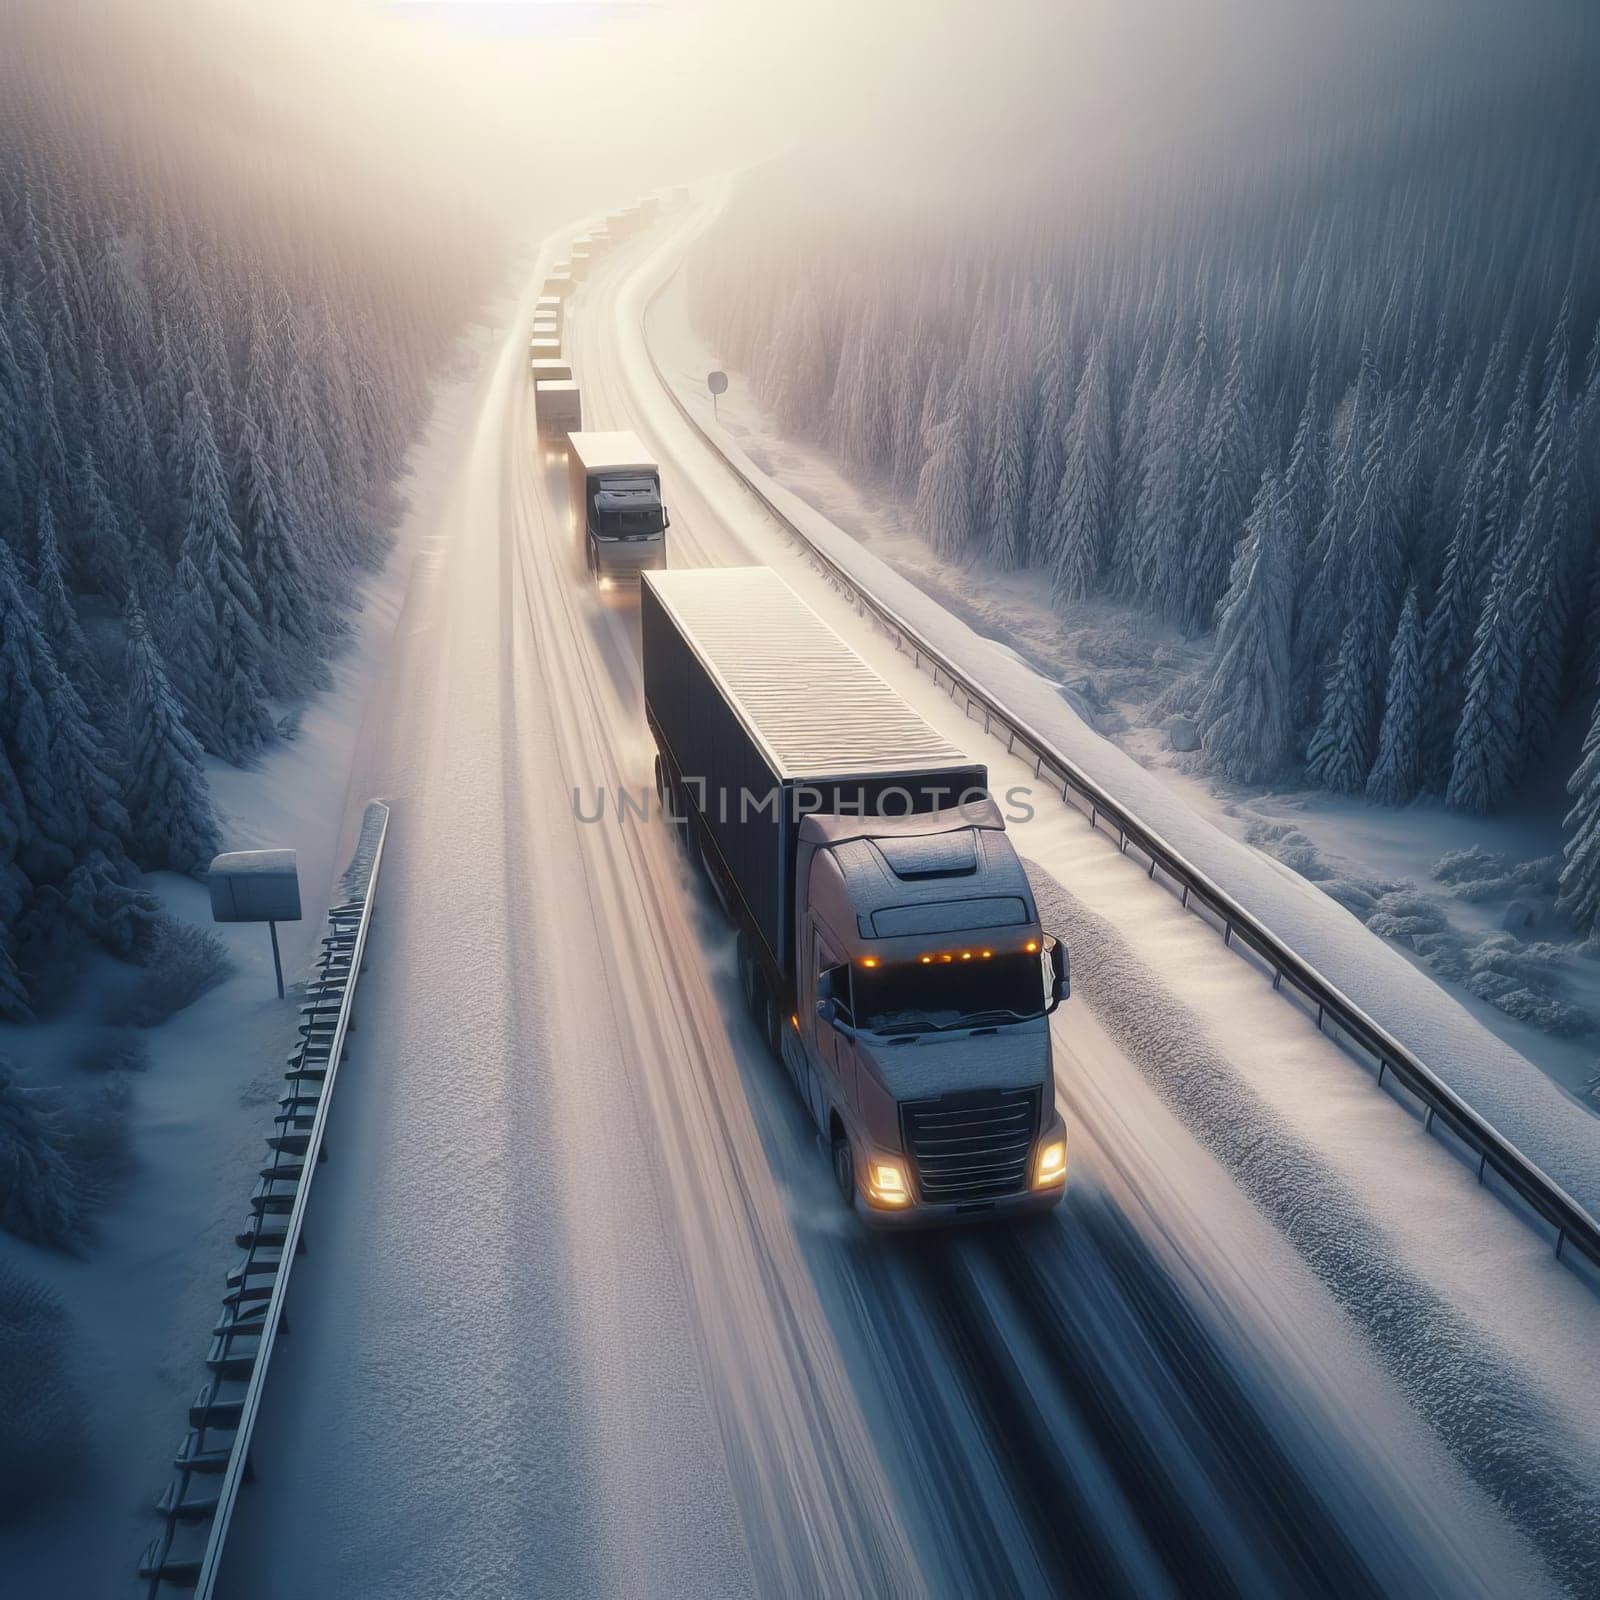 An aerial view of a snowy highway bustling with trucks, framed by snow-covered trees on either side. by sfinks